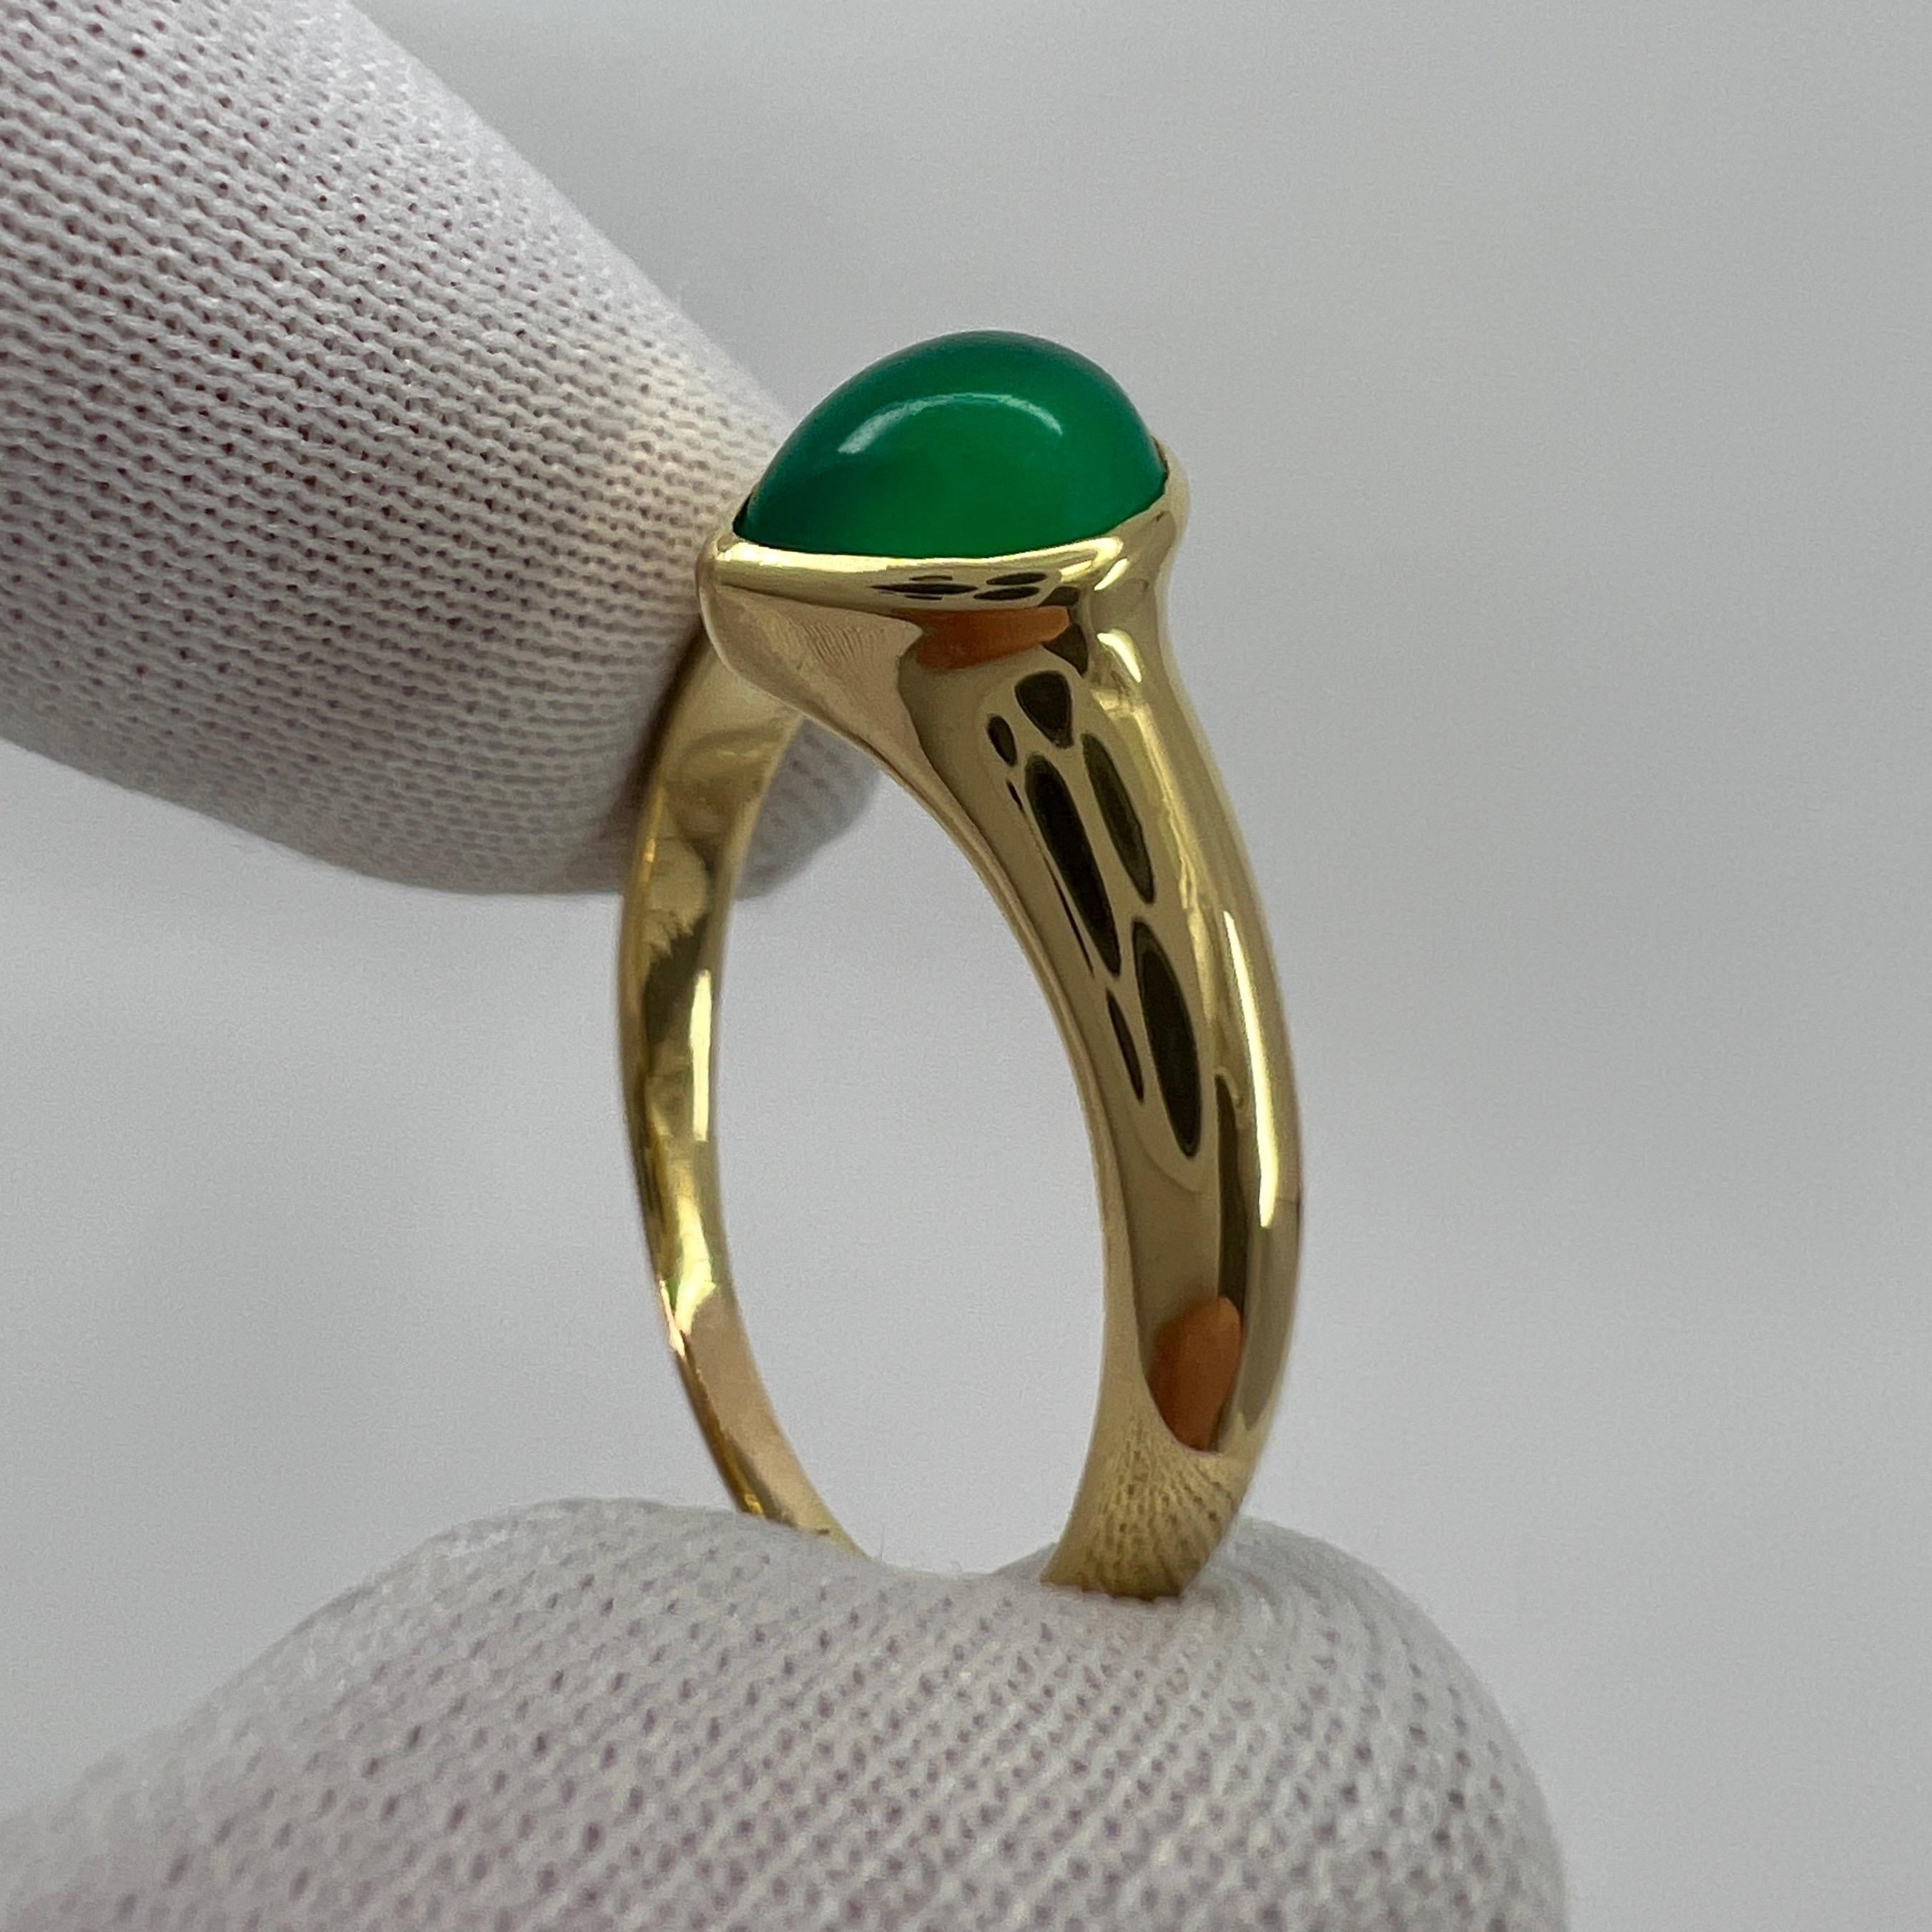 Rare Vintage Van Cleef & Arpels Green Chalcedony Pear Cut 18k Yellow Gold Ring For Sale 1